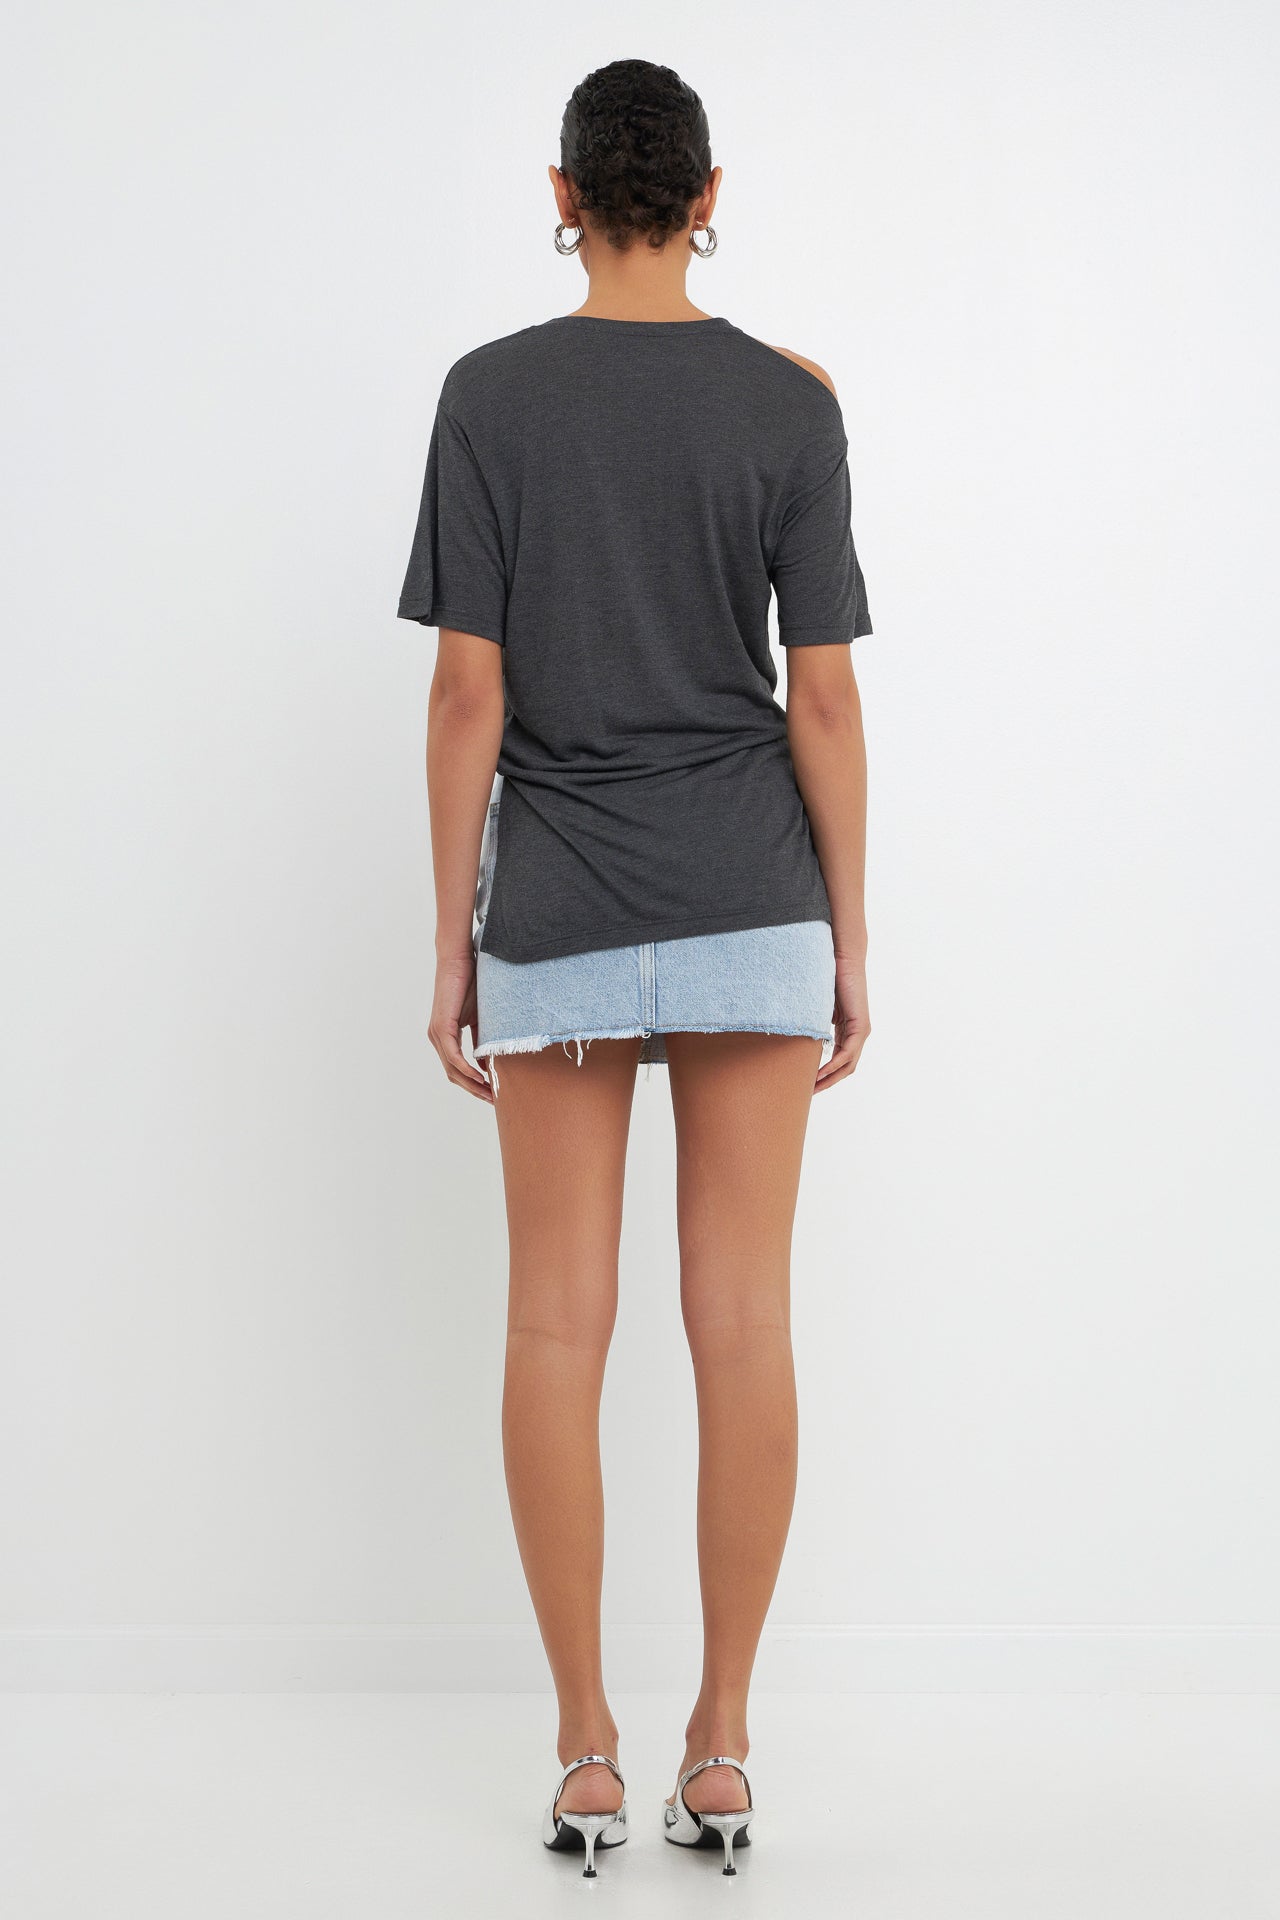 GREY LAB - T-Shirt with Cutout Shoulder Detail - T-SHIRTS available at Objectrare